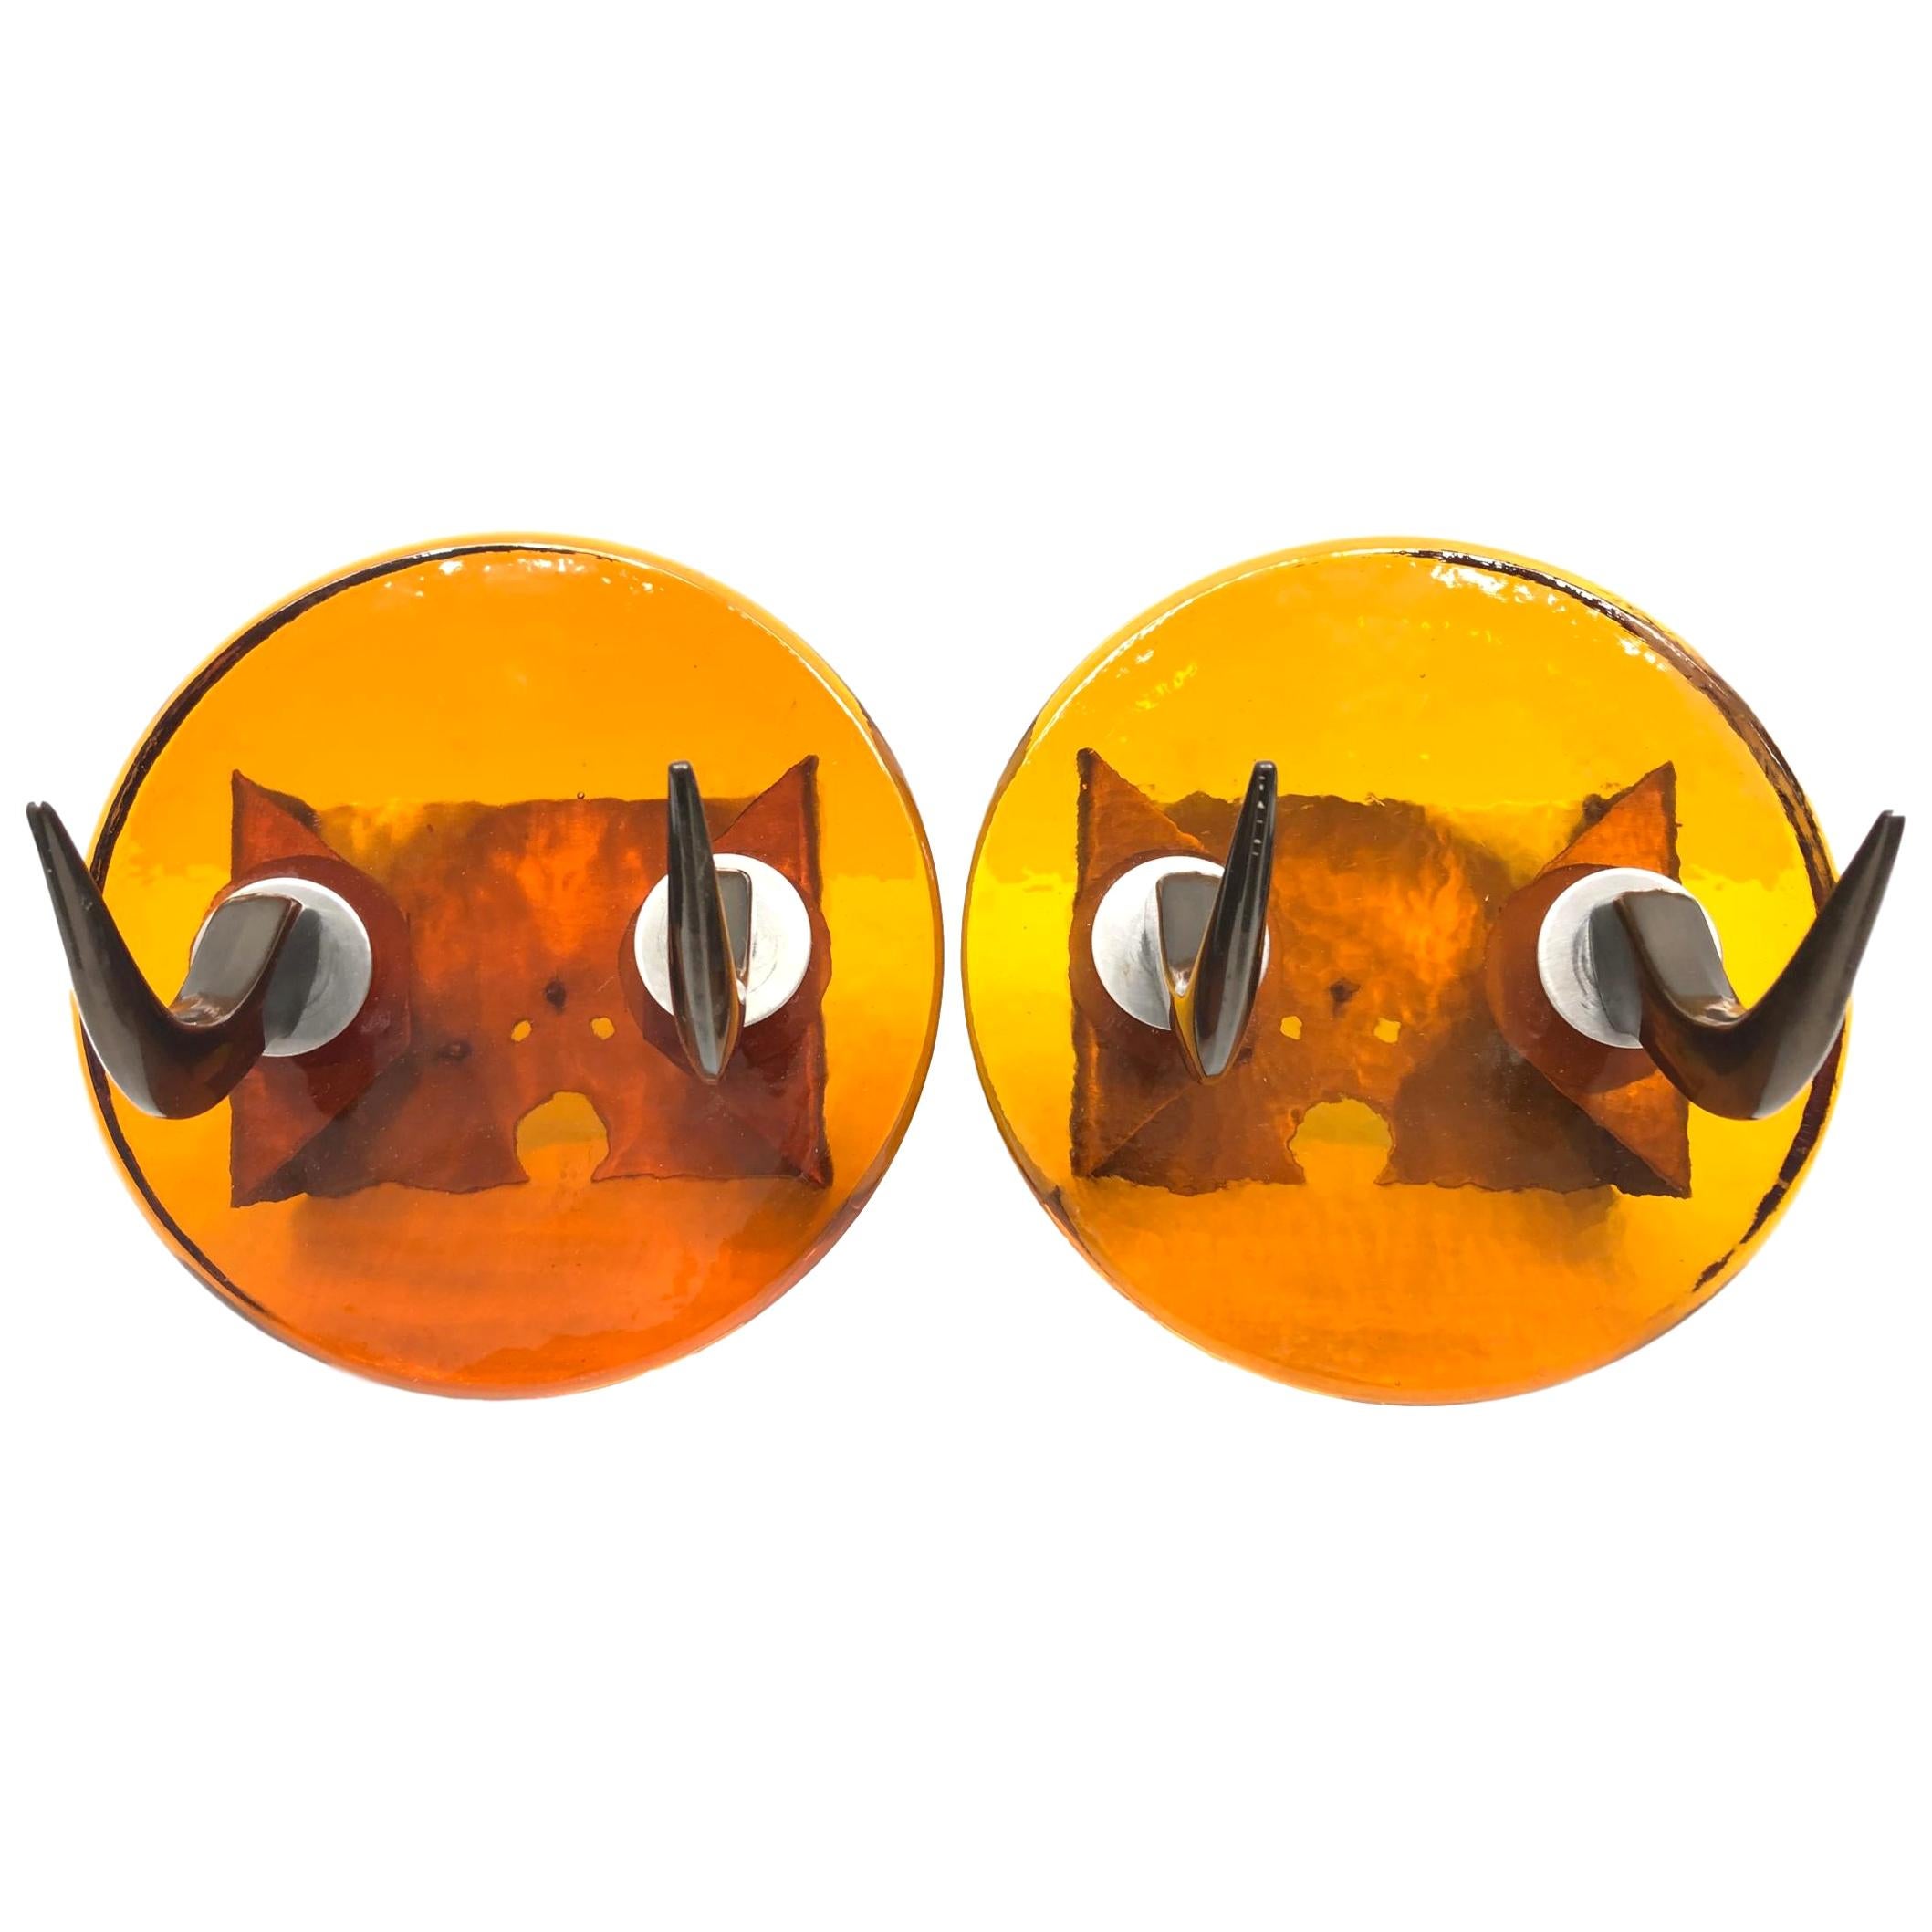 Pair of Very Heavy Textured Glass & Metal Cow Horn Mid-Century Modern Wall Hooks For Sale